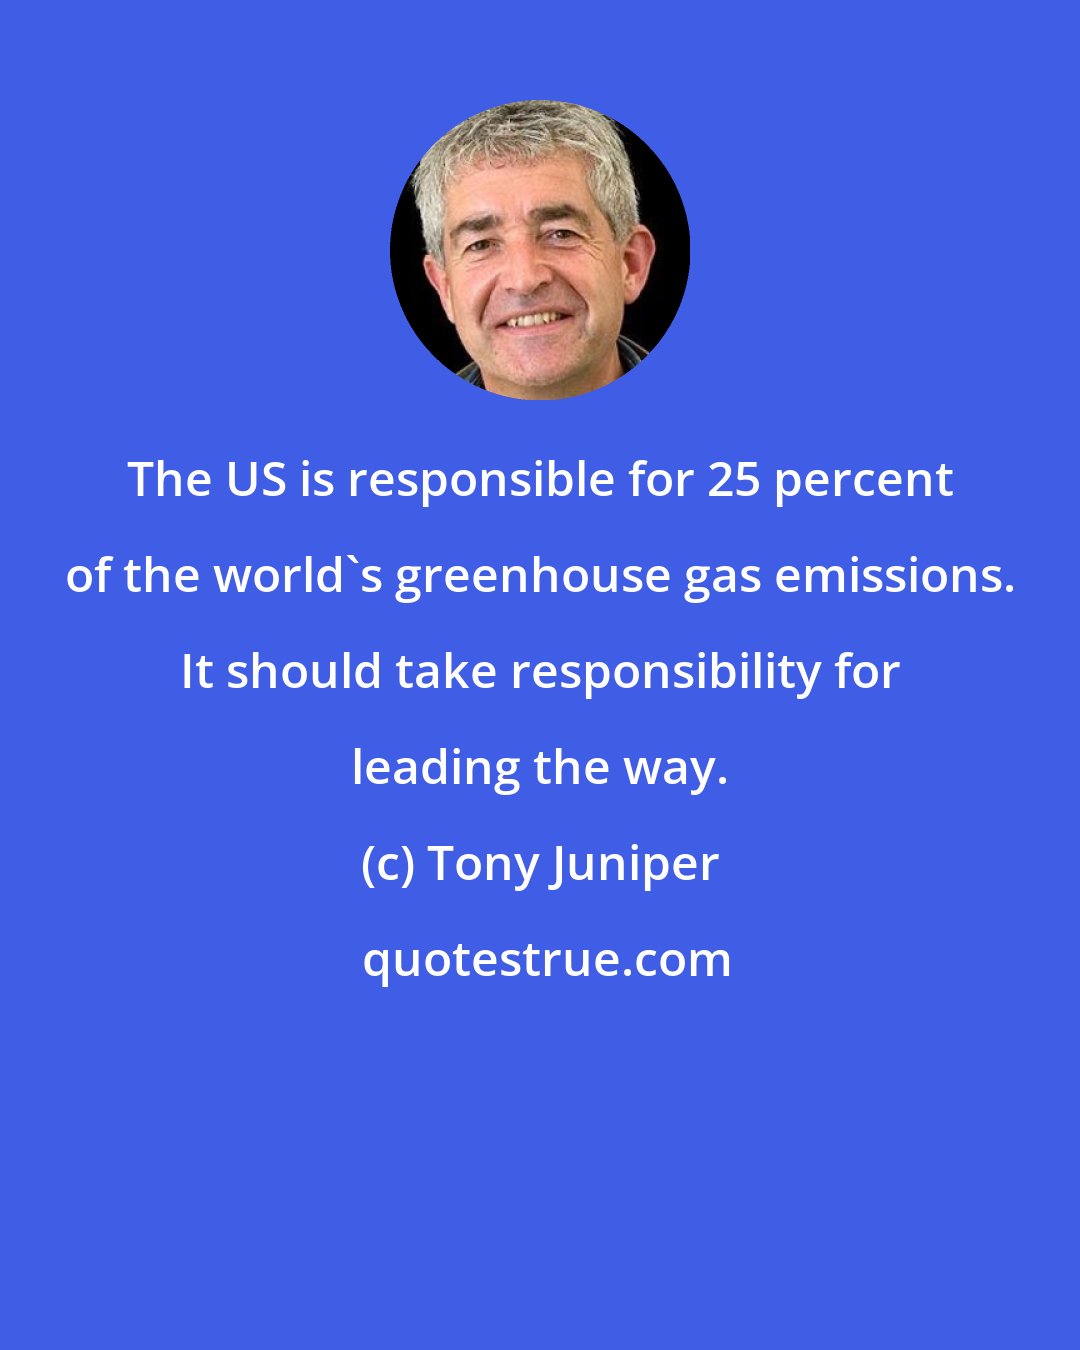 Tony Juniper: The US is responsible for 25 percent of the world's greenhouse gas emissions. It should take responsibility for leading the way.